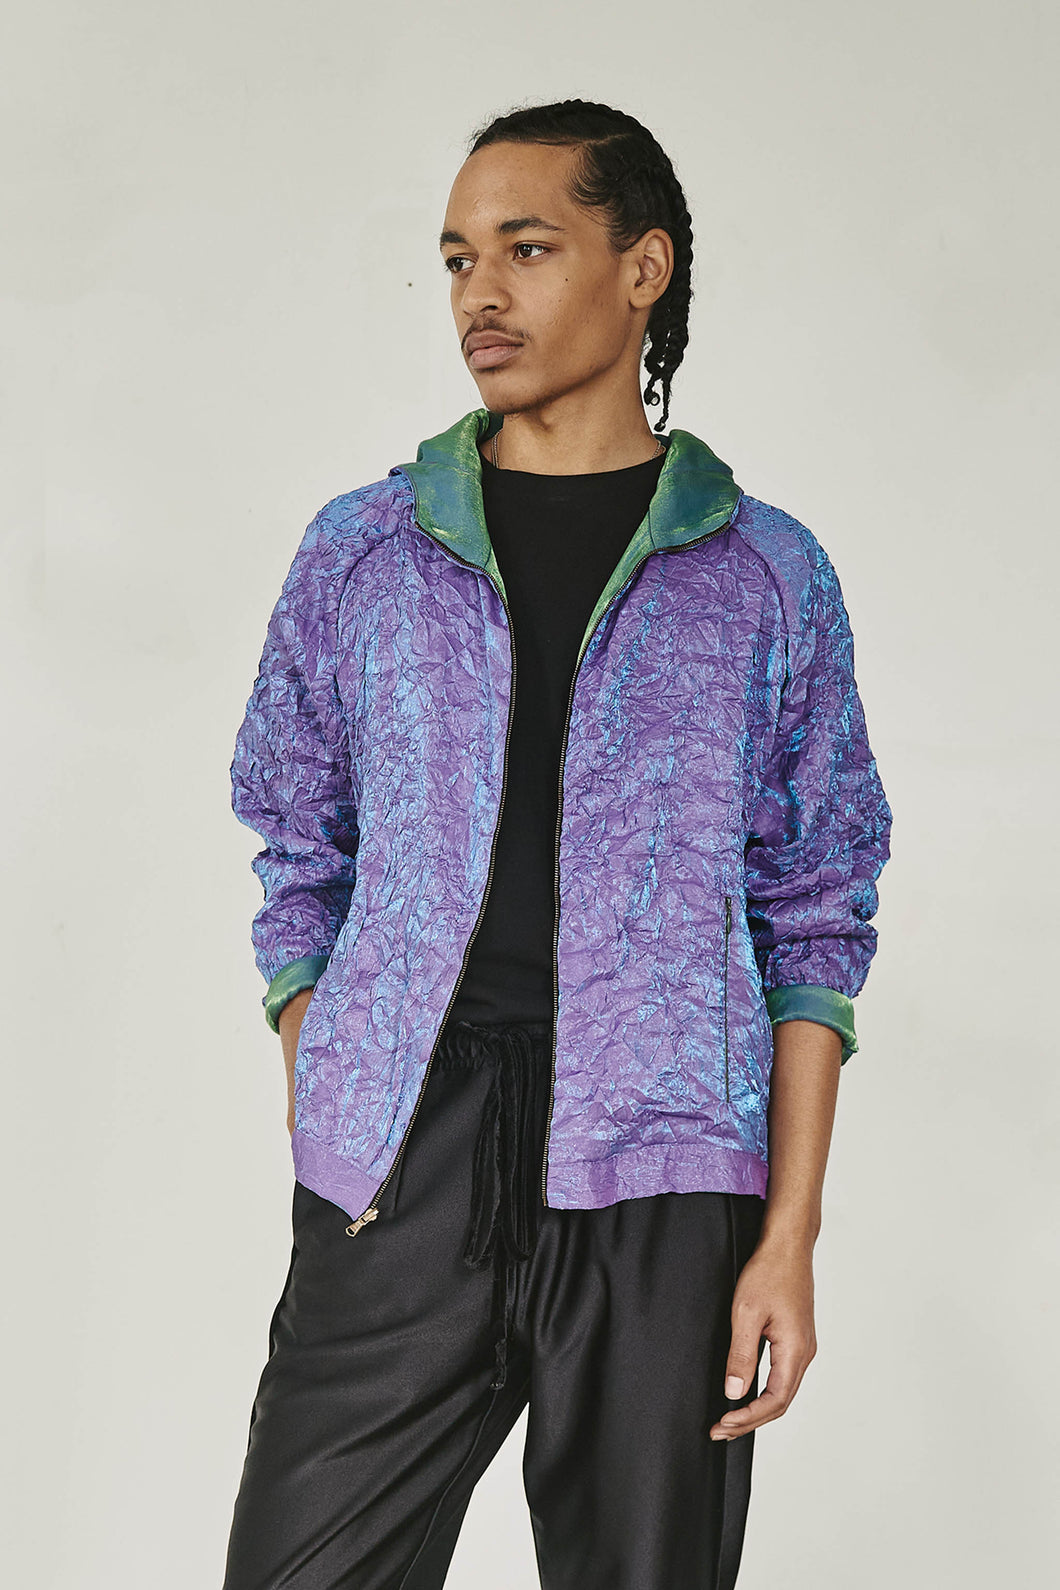 Crushed Iridescent Reversible Hoodie - Made To Order